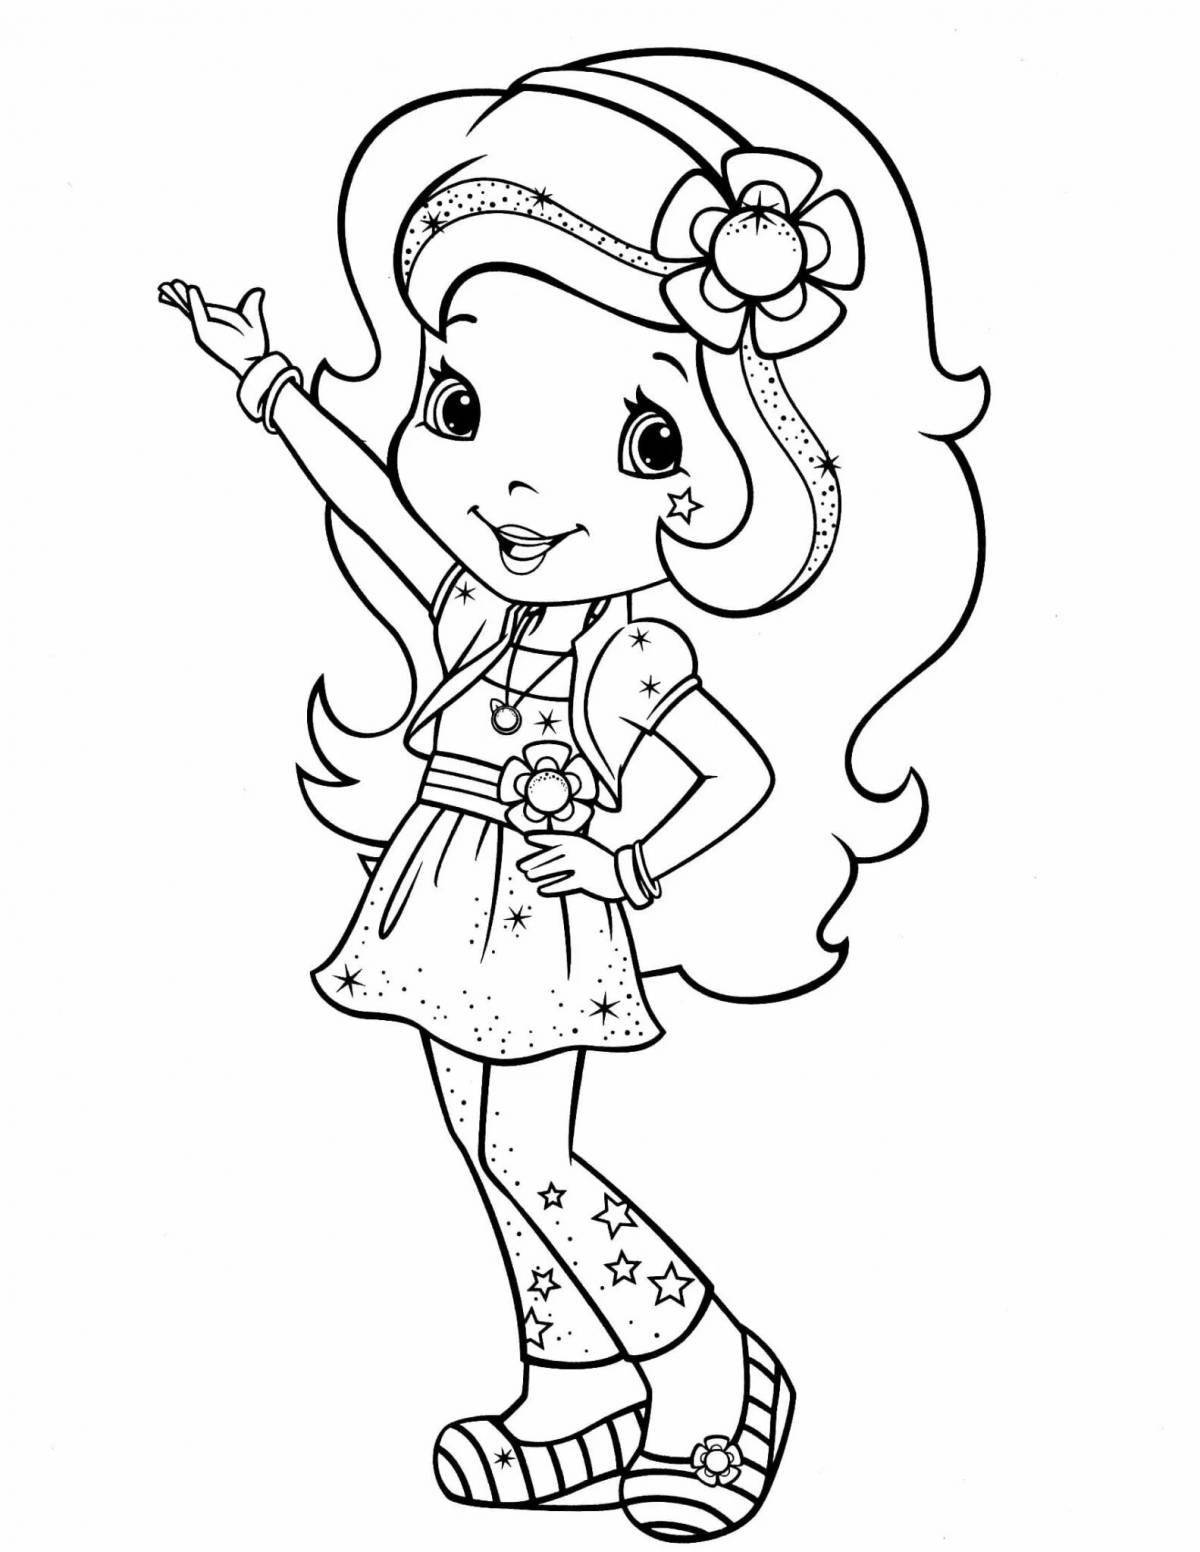 Smiling strawberry coloring page